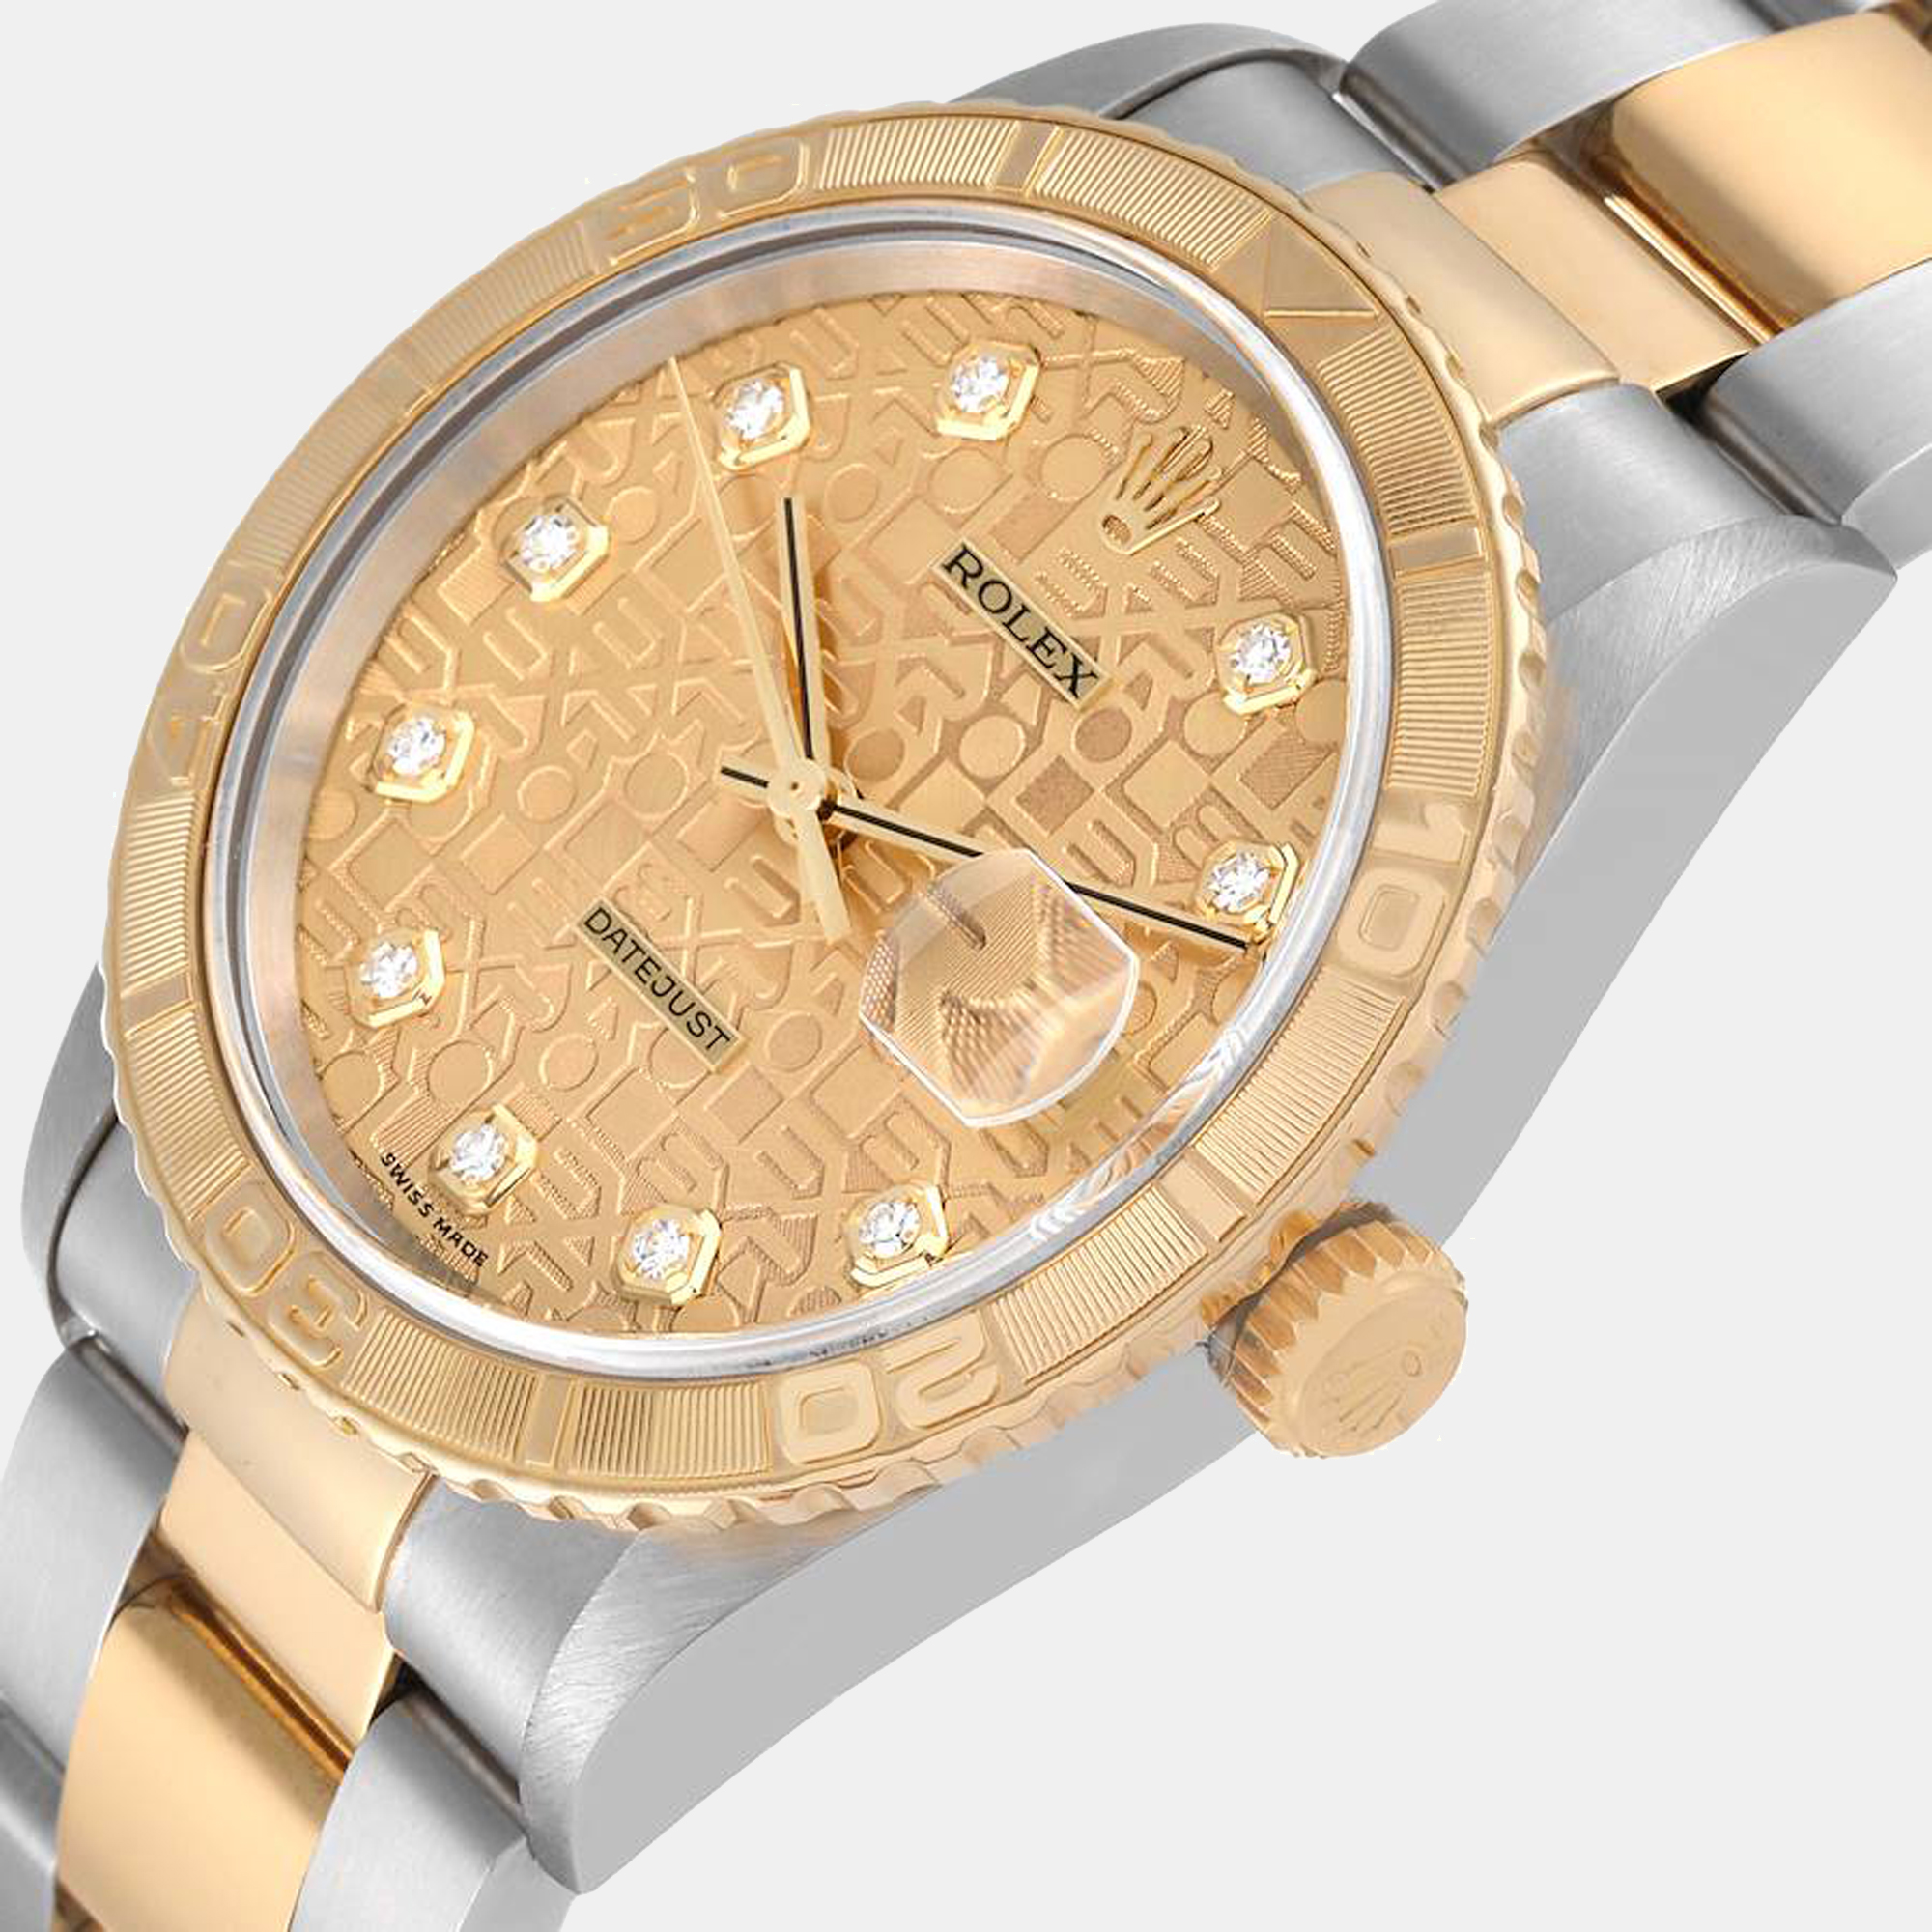 

Rolex Champagne Diamonds 18k Yellow Gold And Stainless Steel Datejust Turnograph 16263 Men's Wristwatch 36 mm